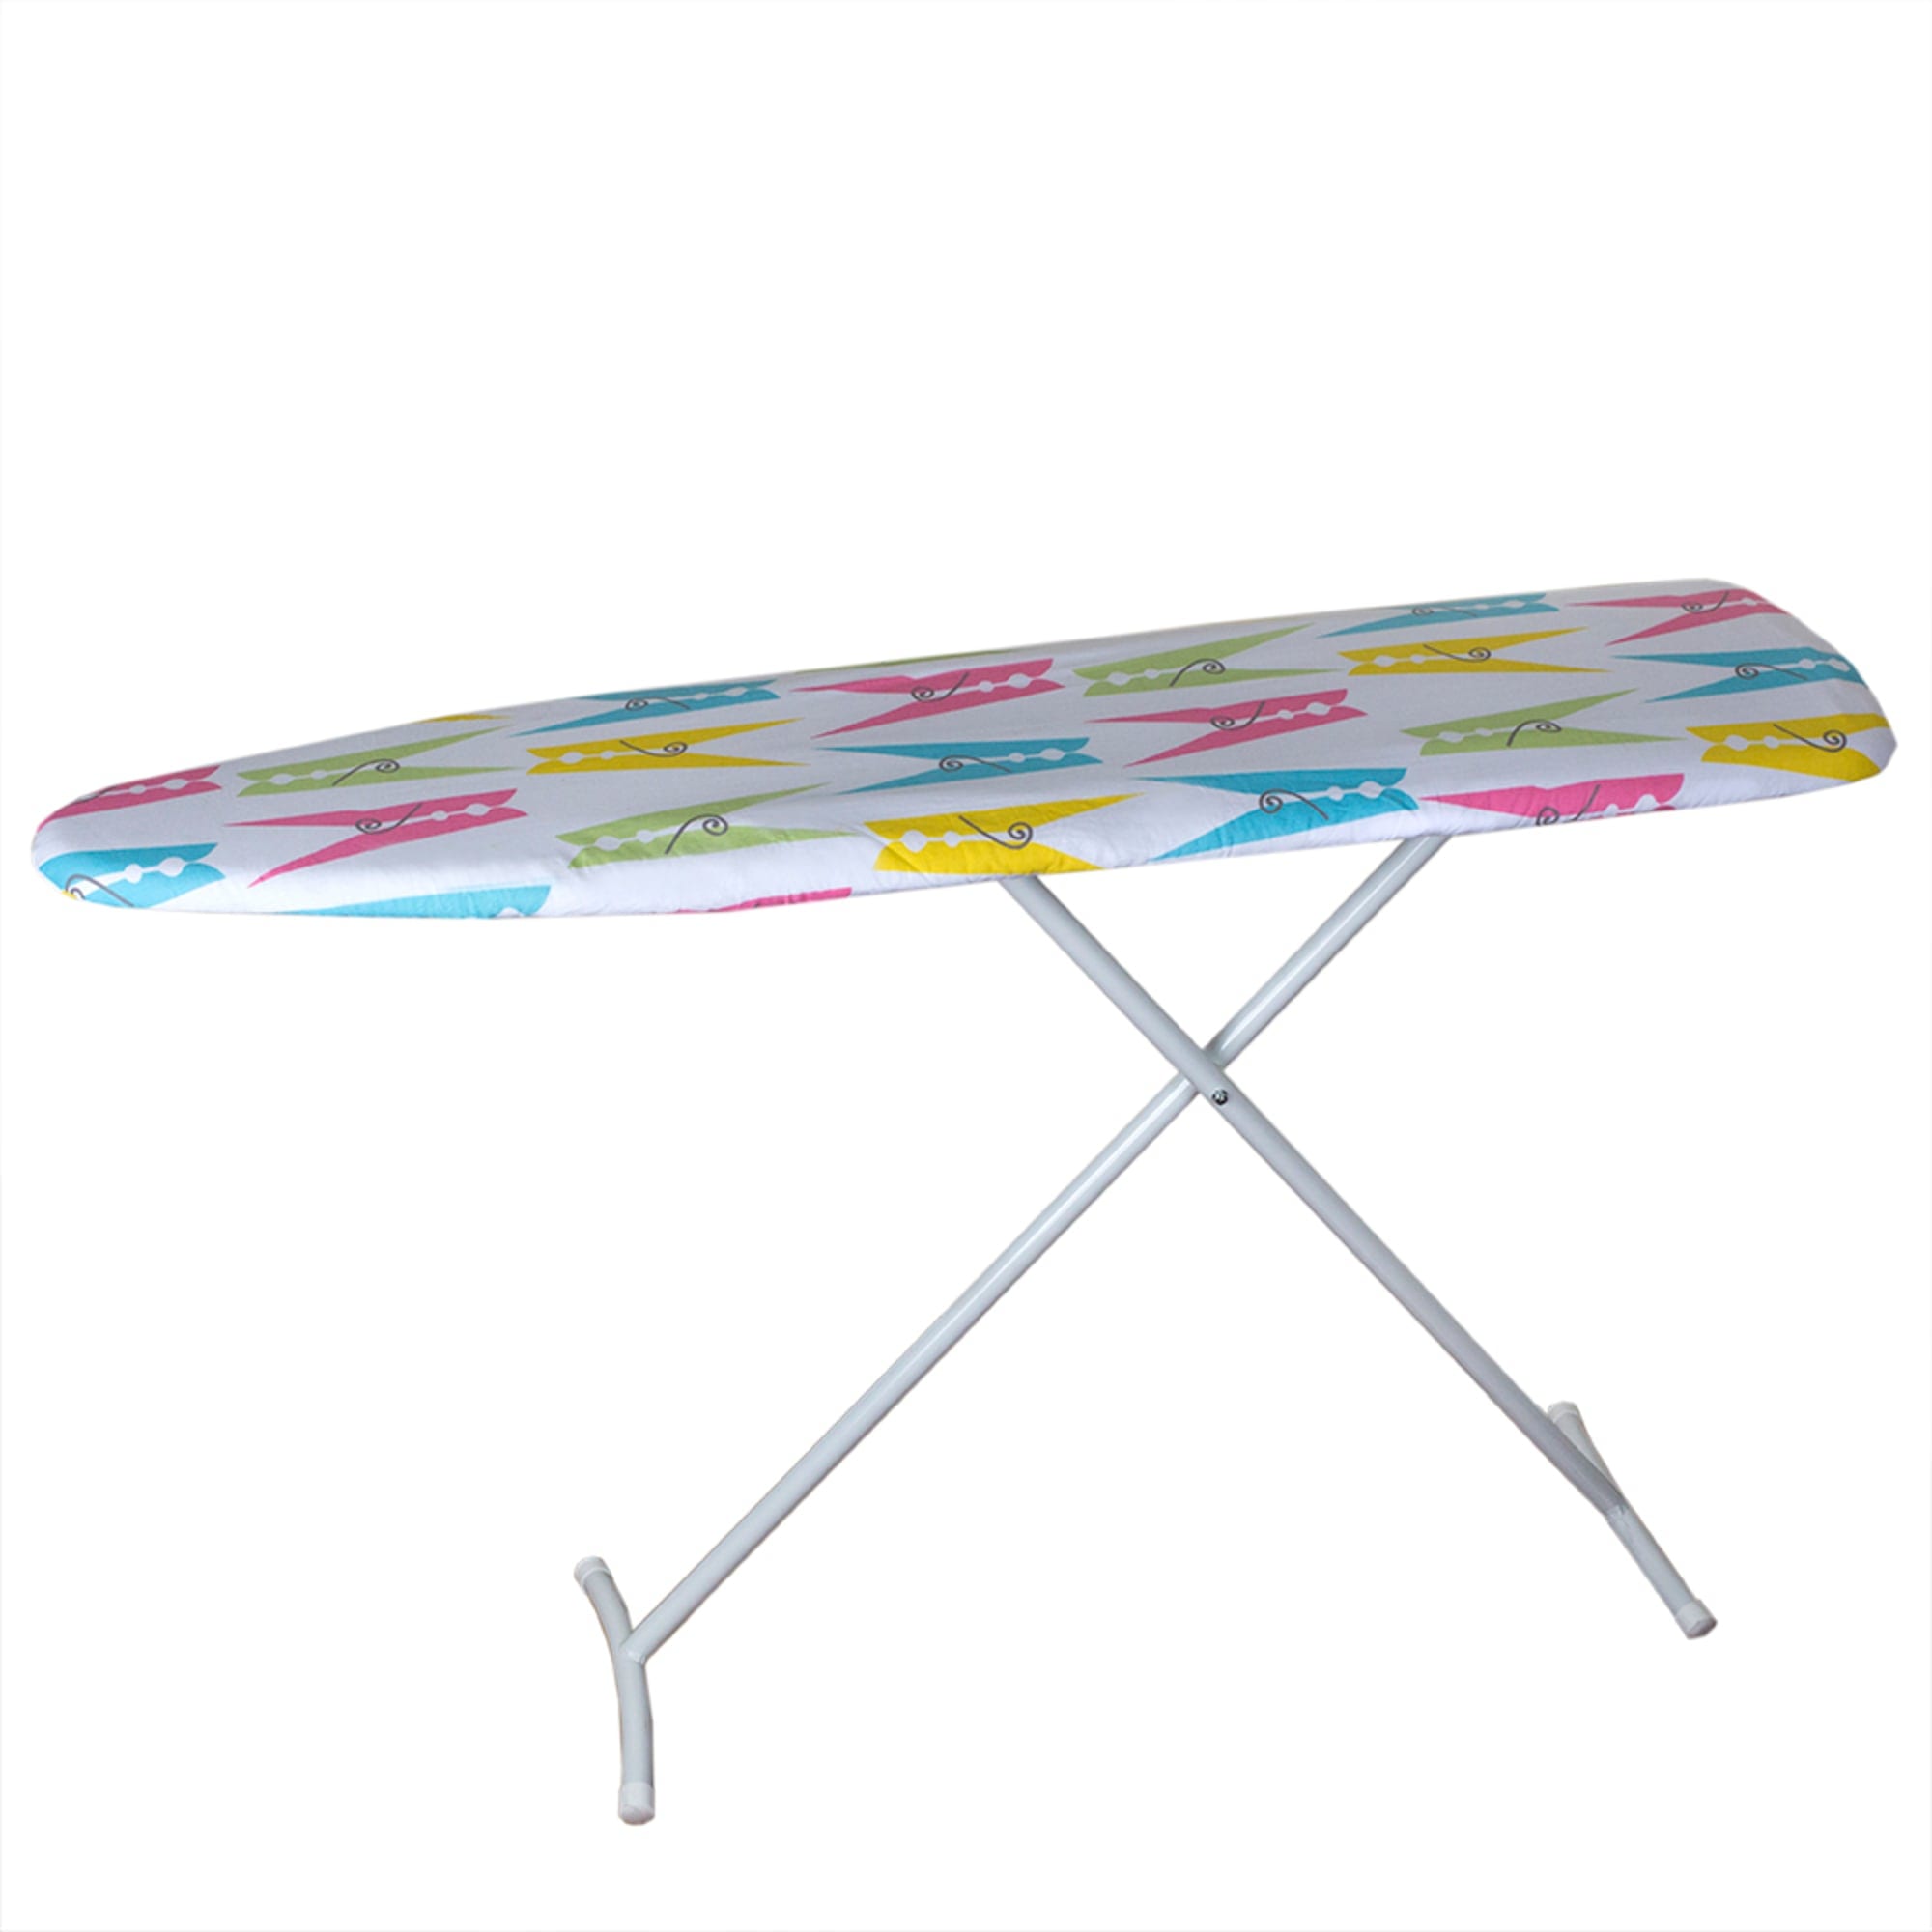 Sunbeam Colorful Clothespins 15" x 54" Cotton Ironing Board Cover, Multi-Color $5.00 EACH, CASE PACK OF 12